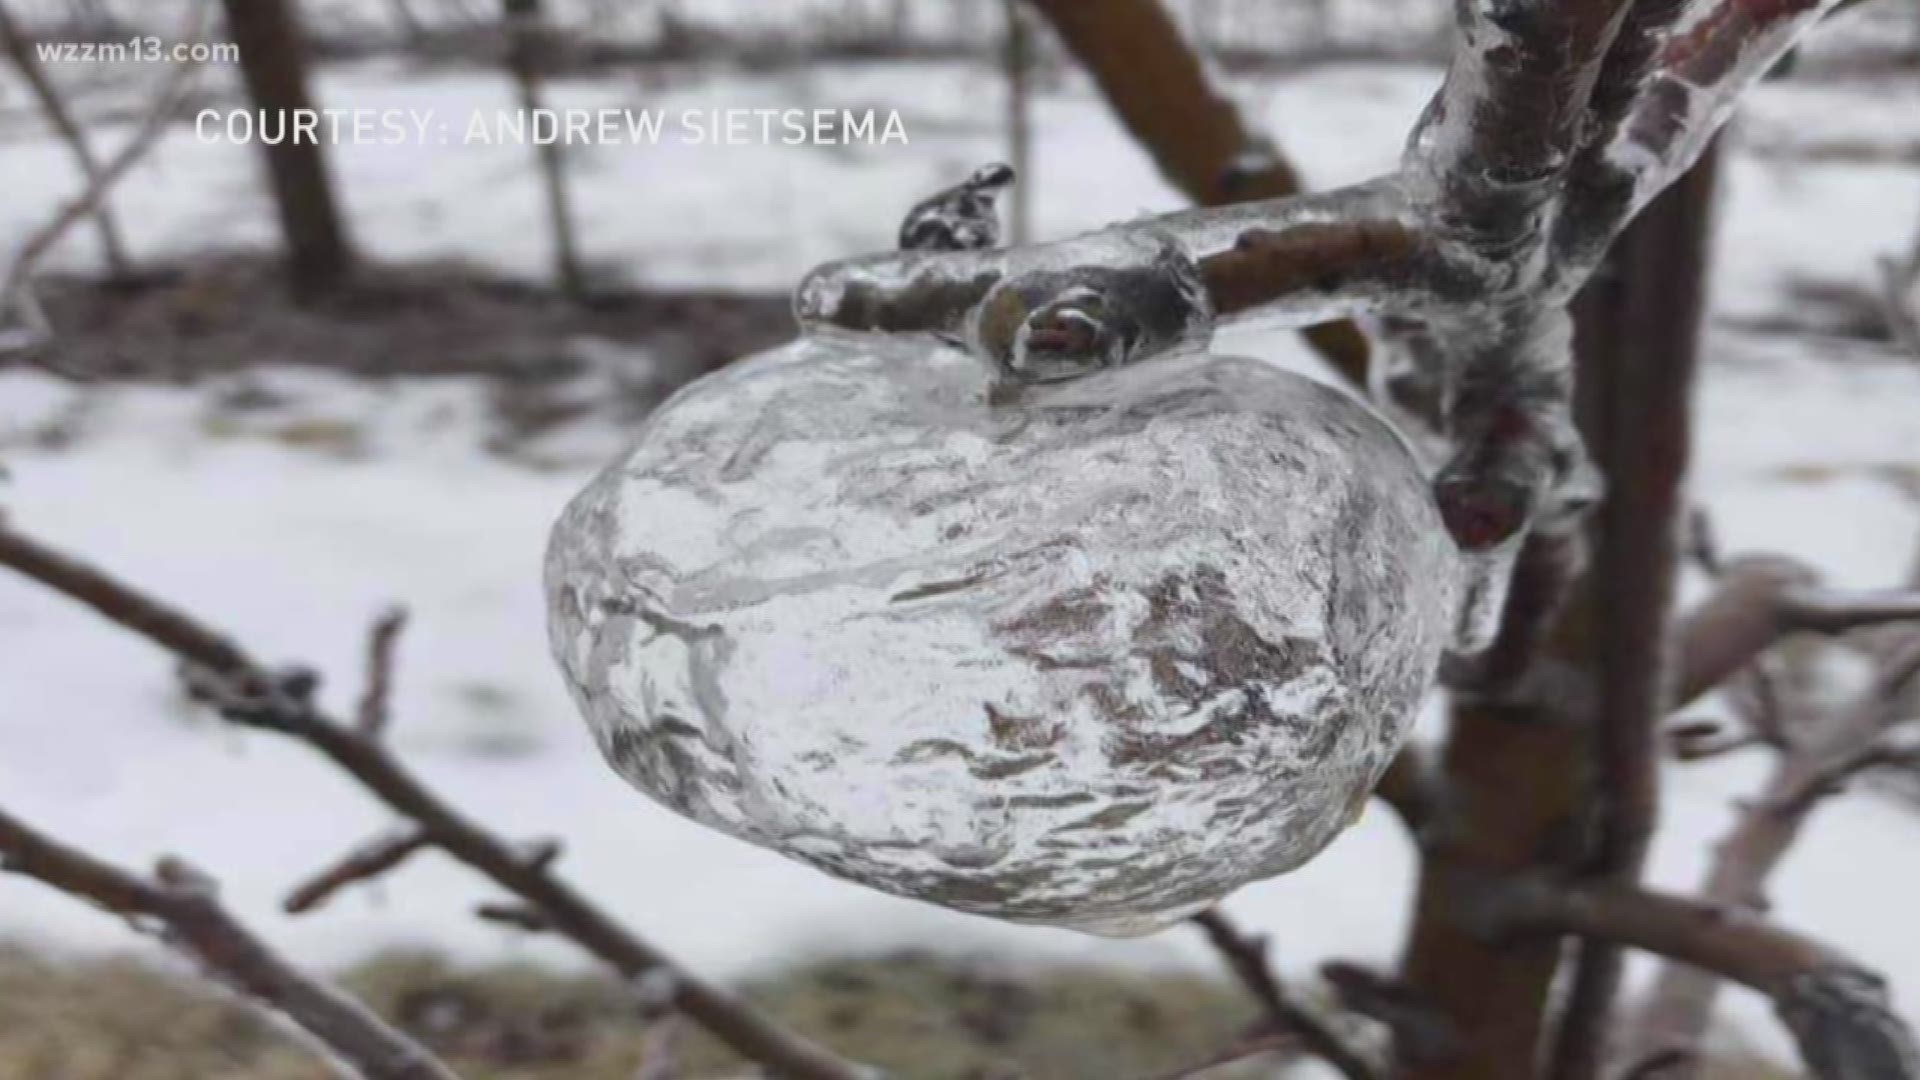 In a state famous for its apple harvests and cold winters, Michiganders are sharing photos of these "Ghost Apples".